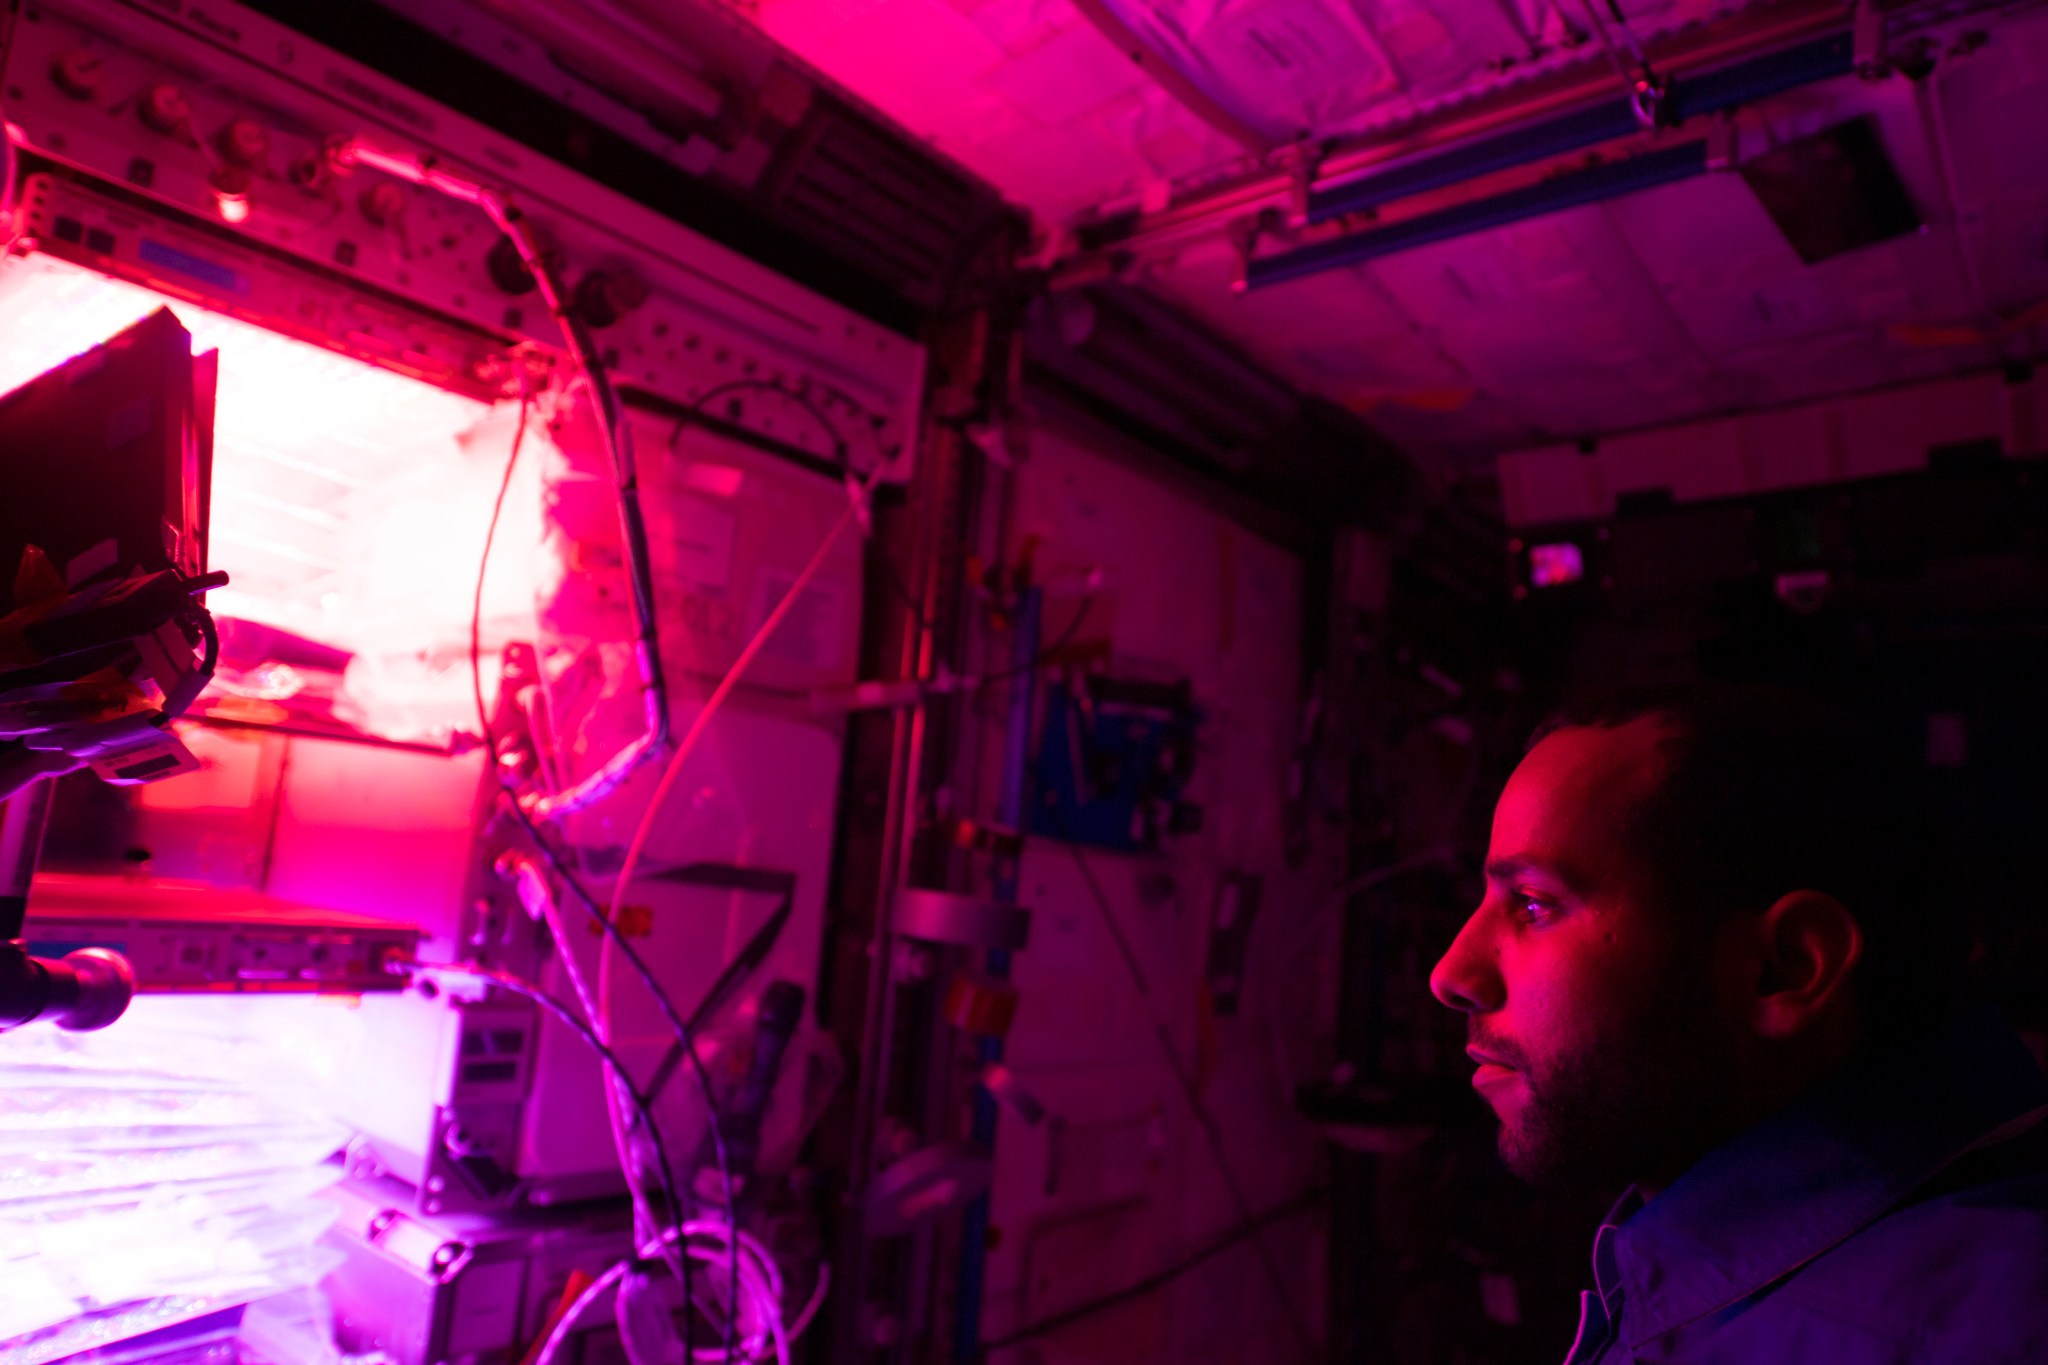 image of an astronaut working with a plant experiment